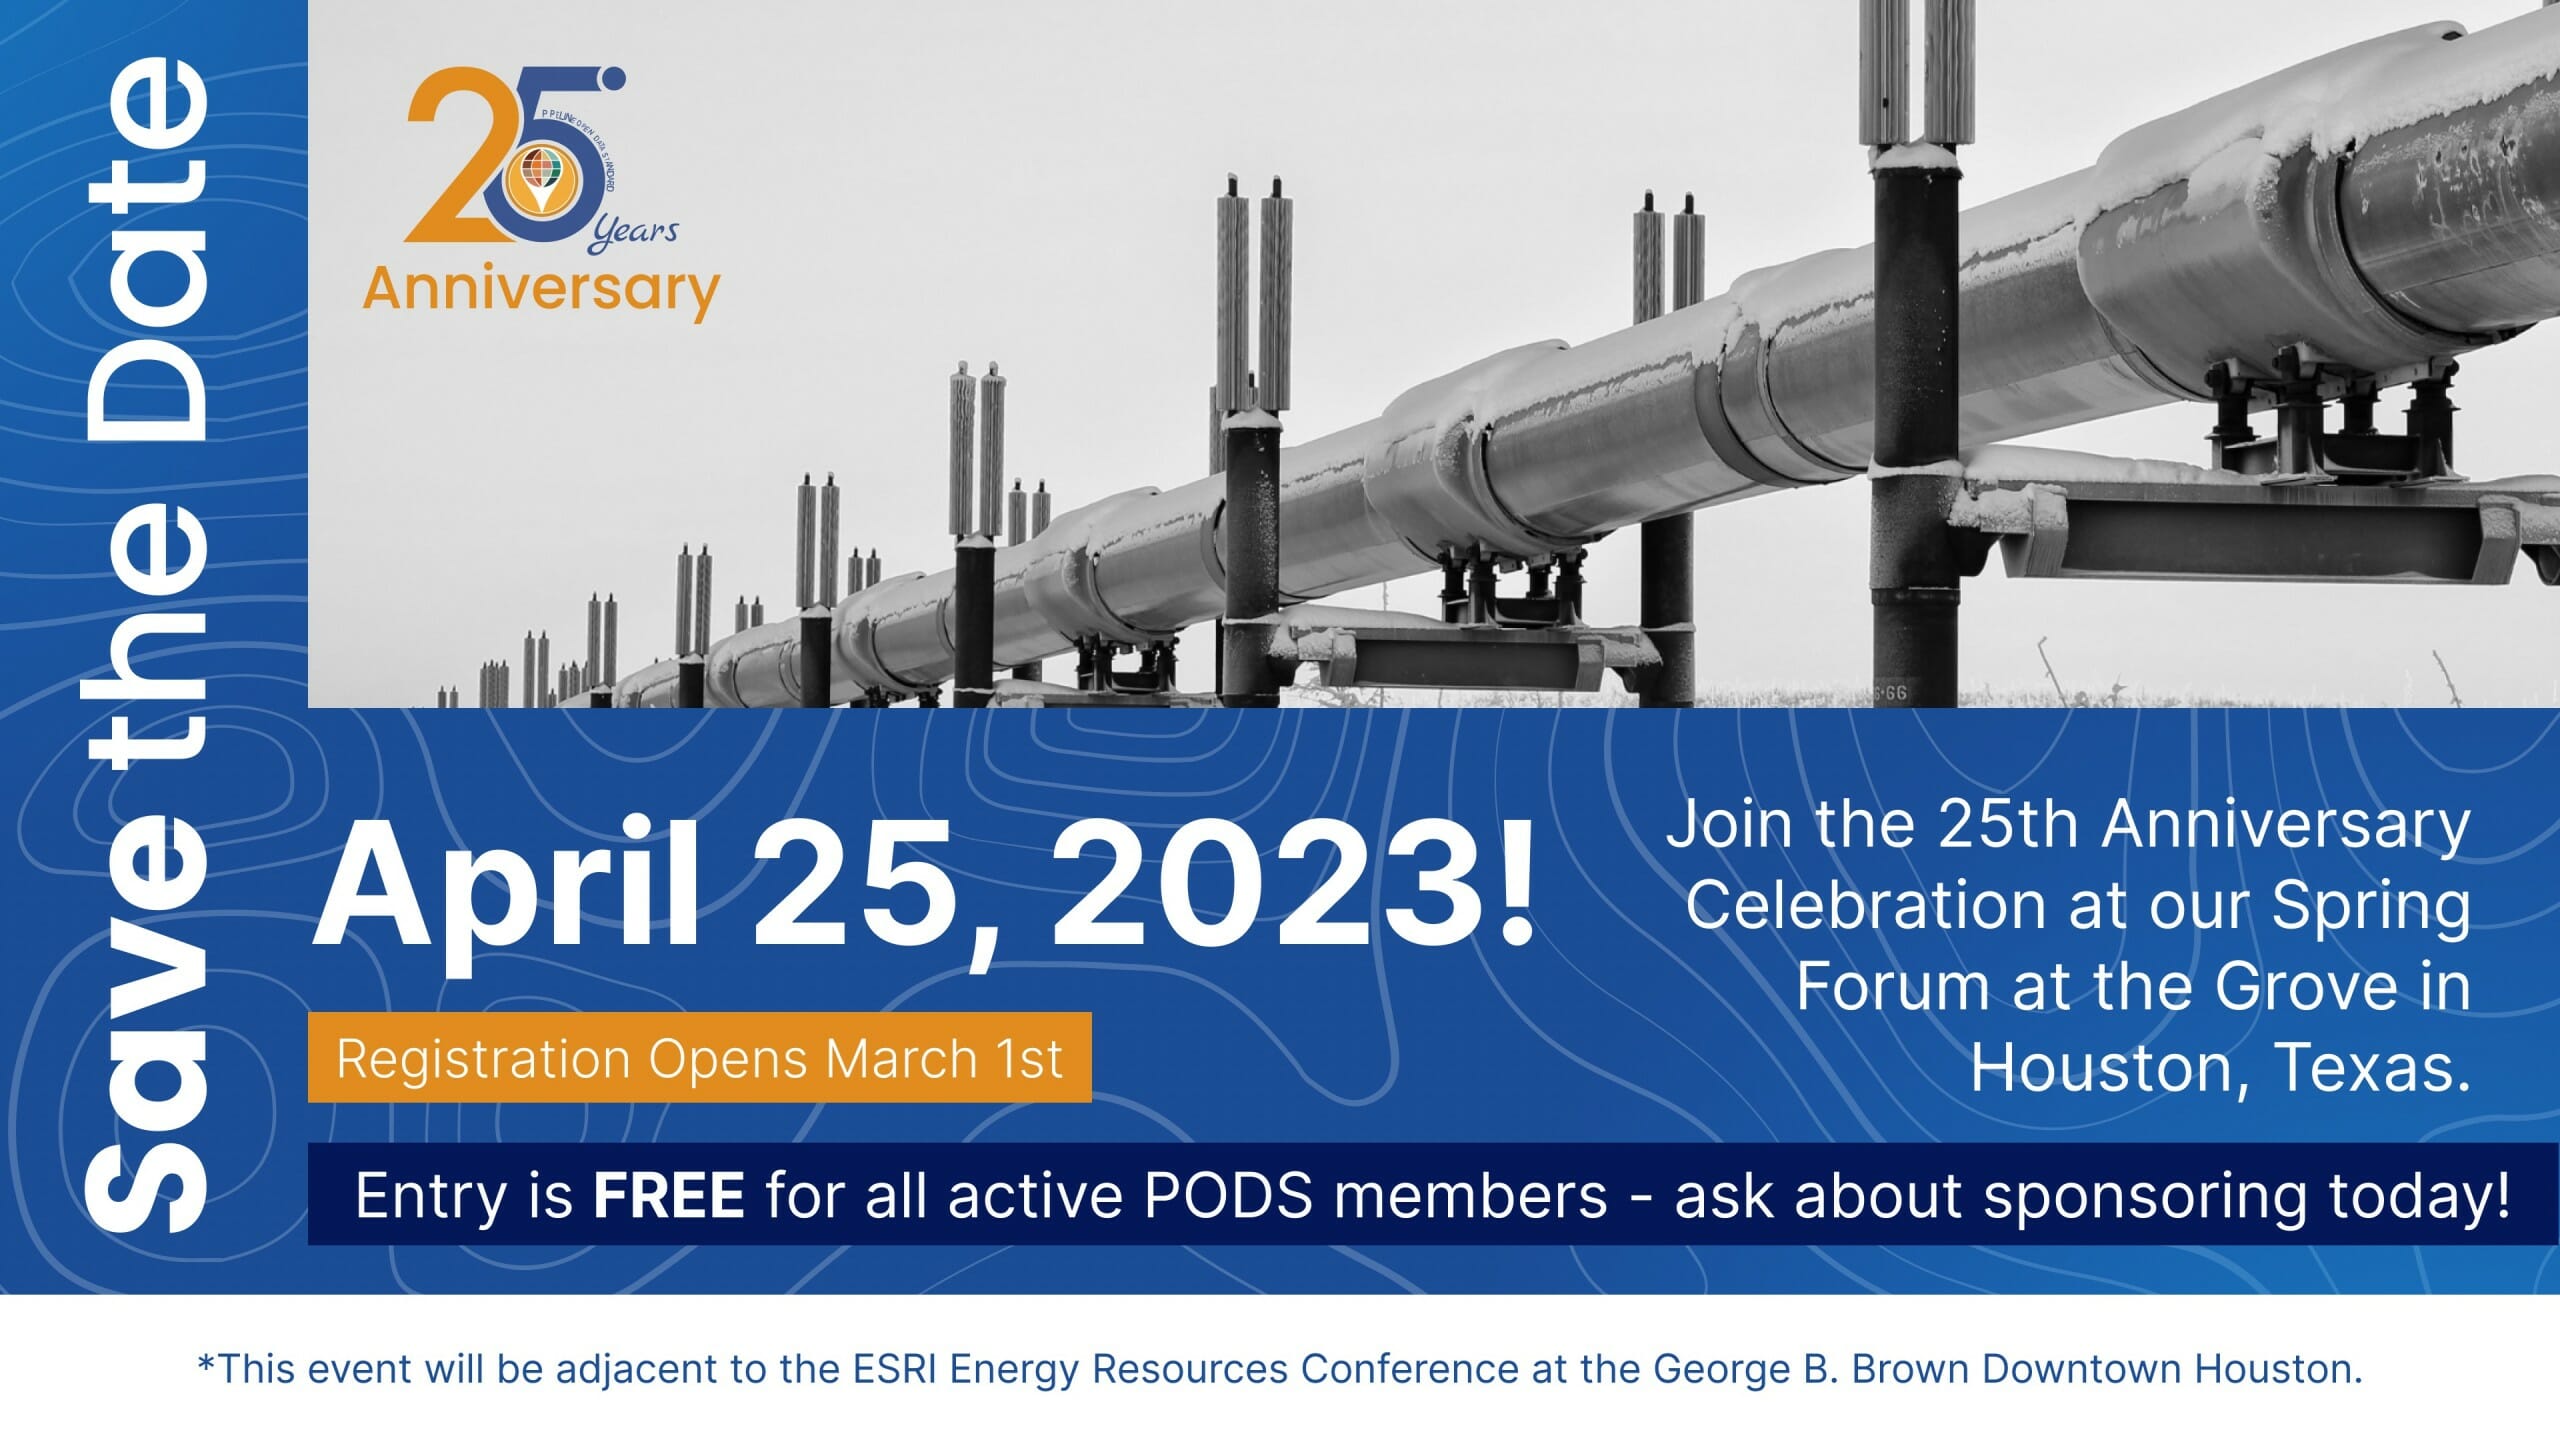 2023 Oil and Gas Pipeline Events